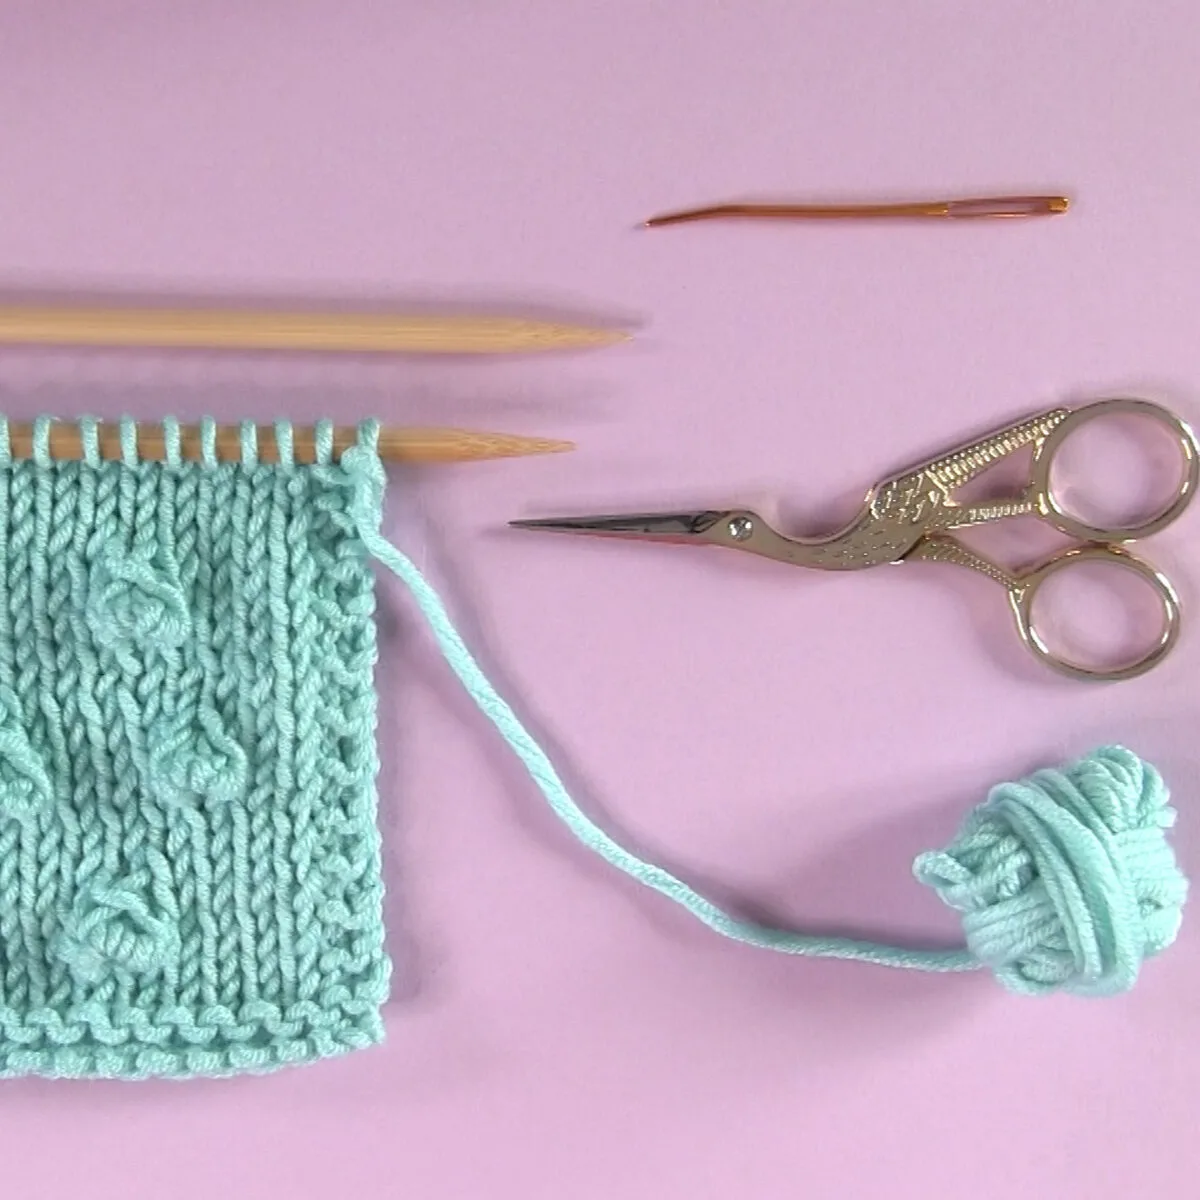 Knitting Materials with Bobble Stitch swatch in light blue yarn color, knitting needles, scissors, and a tapestry needle.